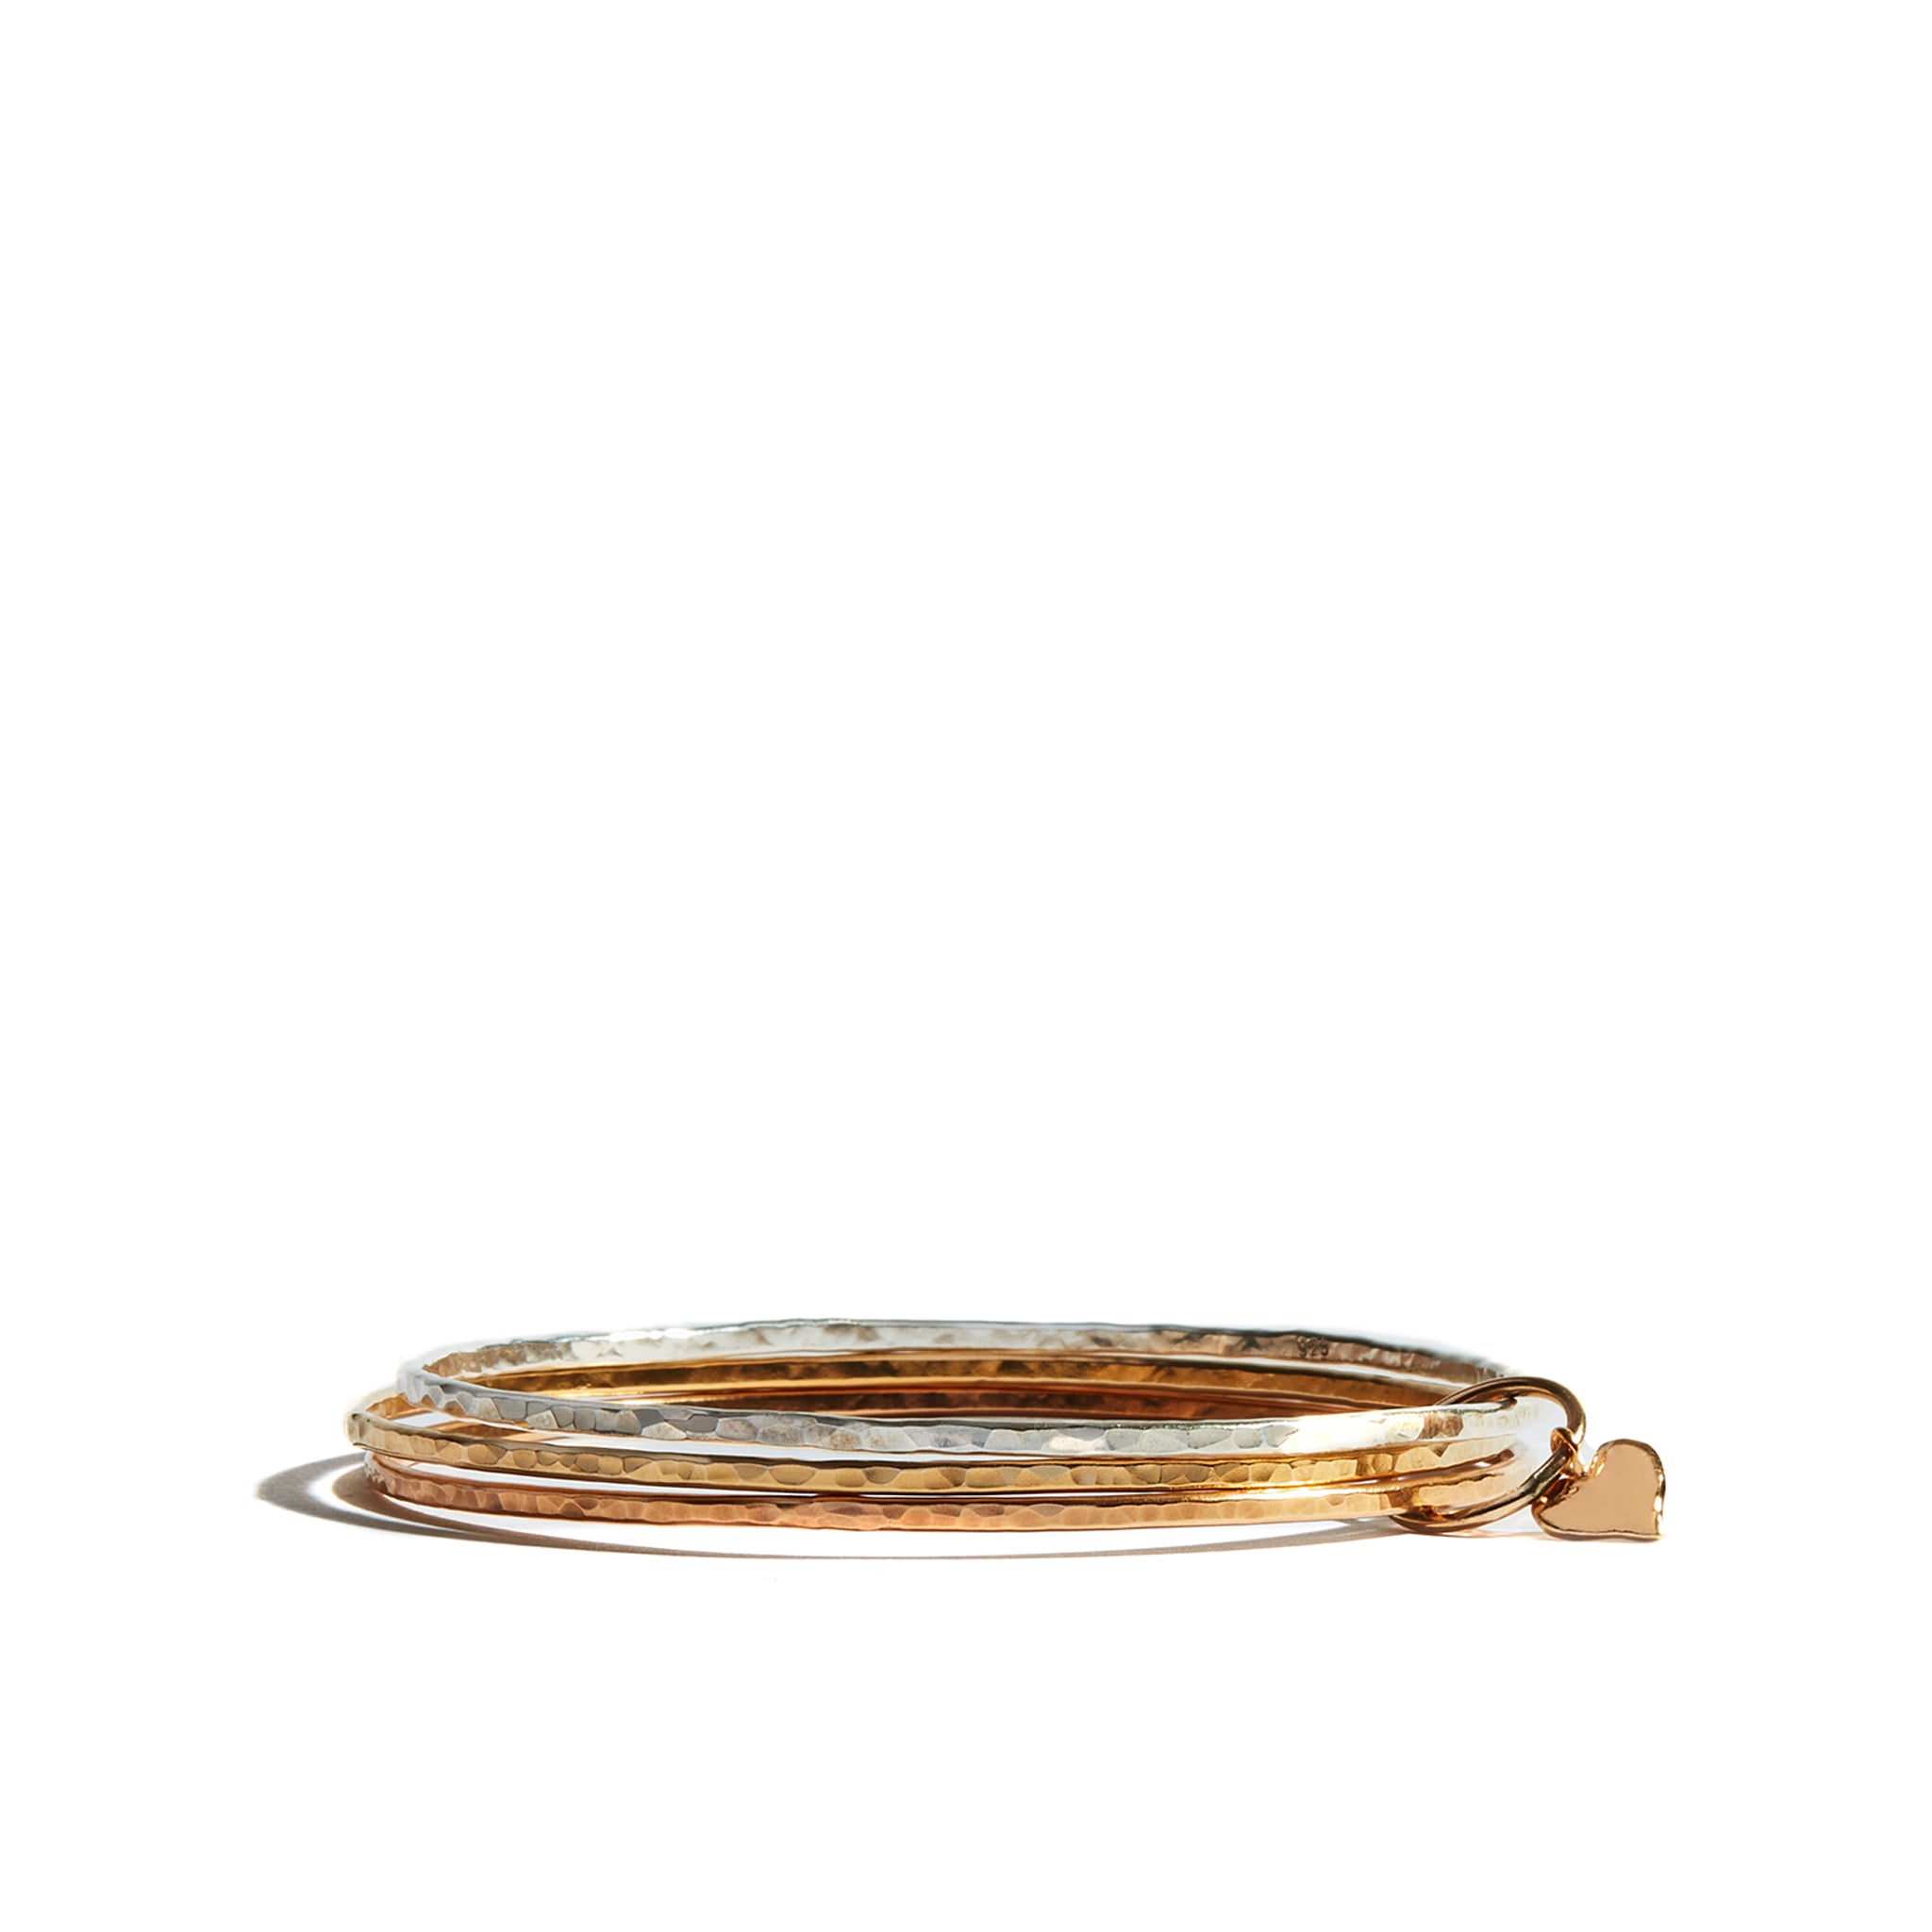 Expertly crafted from 14 carat gold filled the Three Tone Bangle is a beautiful work of art. Its carefully hand hammered finish creates an exquisite look and feel defined by its combination of yellow gold rose gold and silver. A playful heart charm completes the bangle offering a subtle touch of elegance.